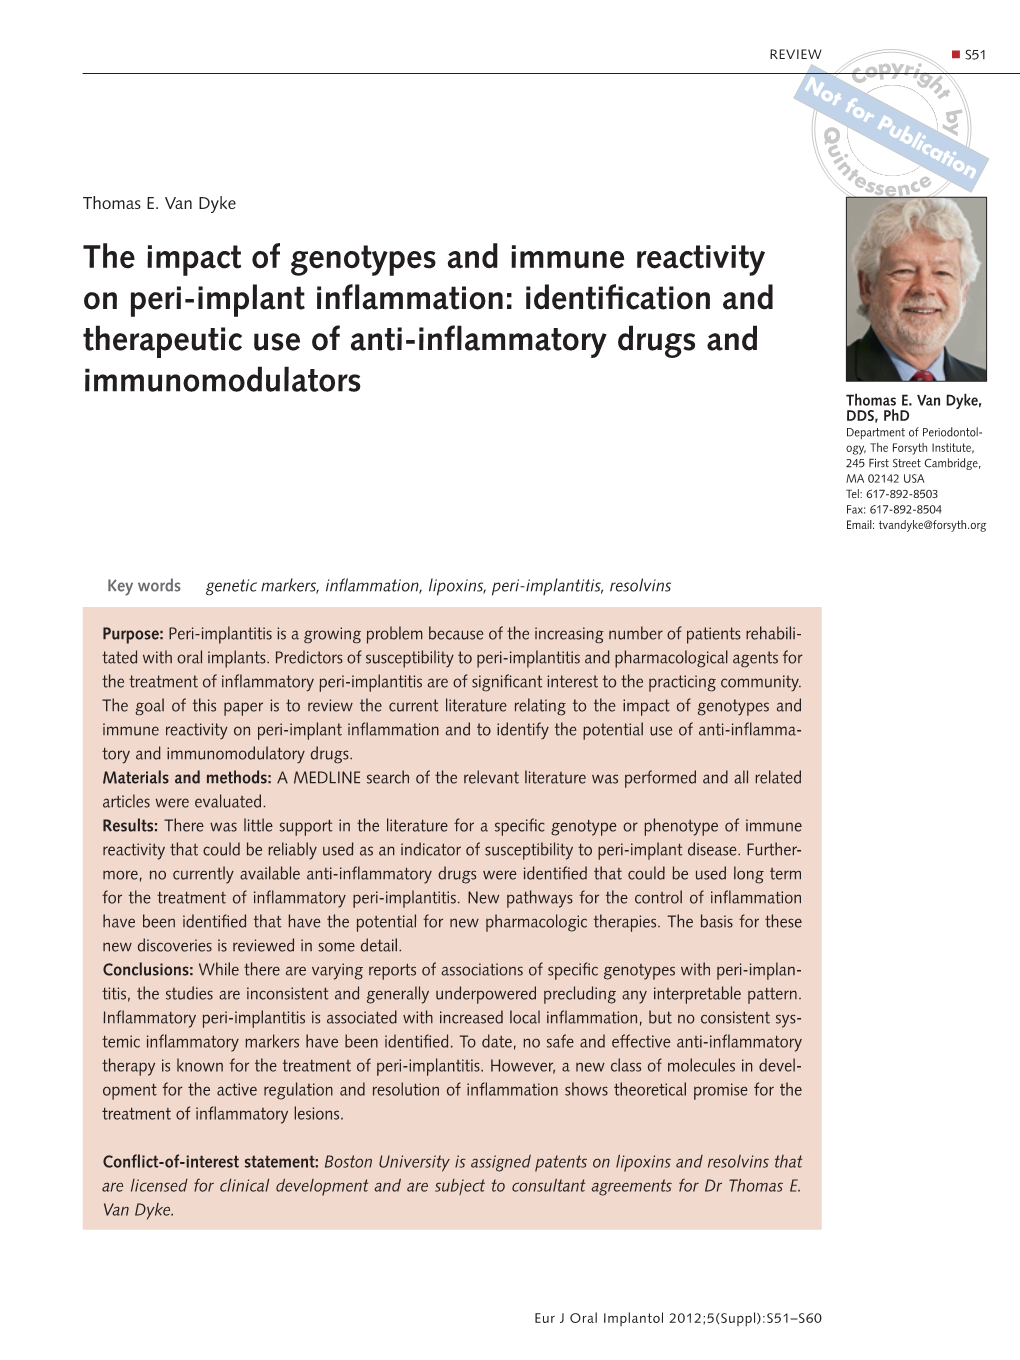 Identification and Therapeutic Use of Anti